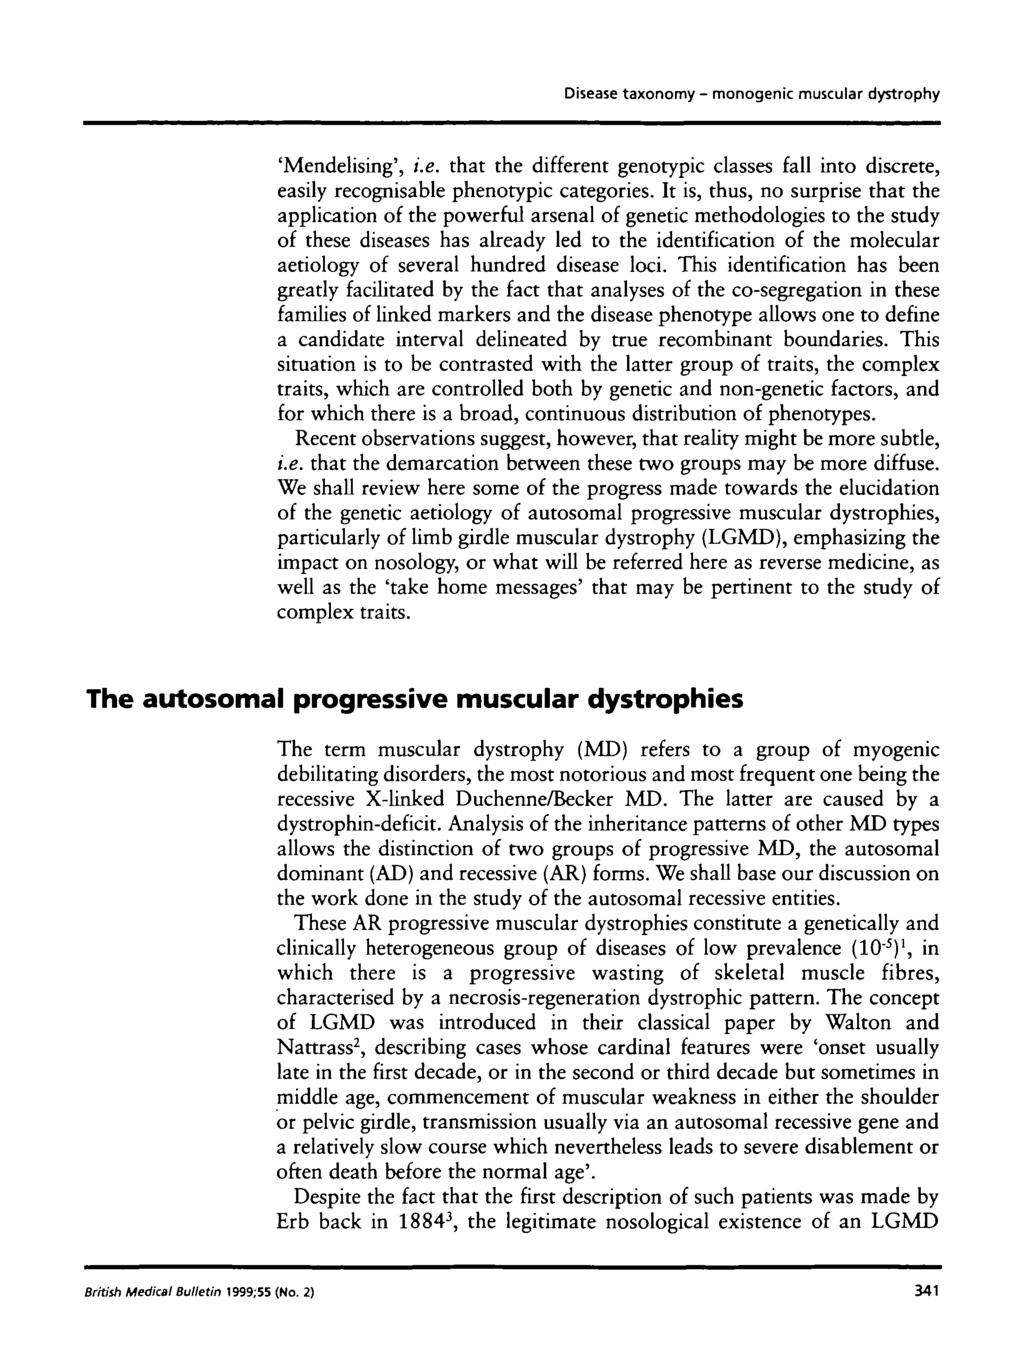 Disease taxonomy - monogenic muscular dystrophy 'Mendelising', i.e. that the different genotypic classes fall into discrete, easily recognisable phenotypic categories.